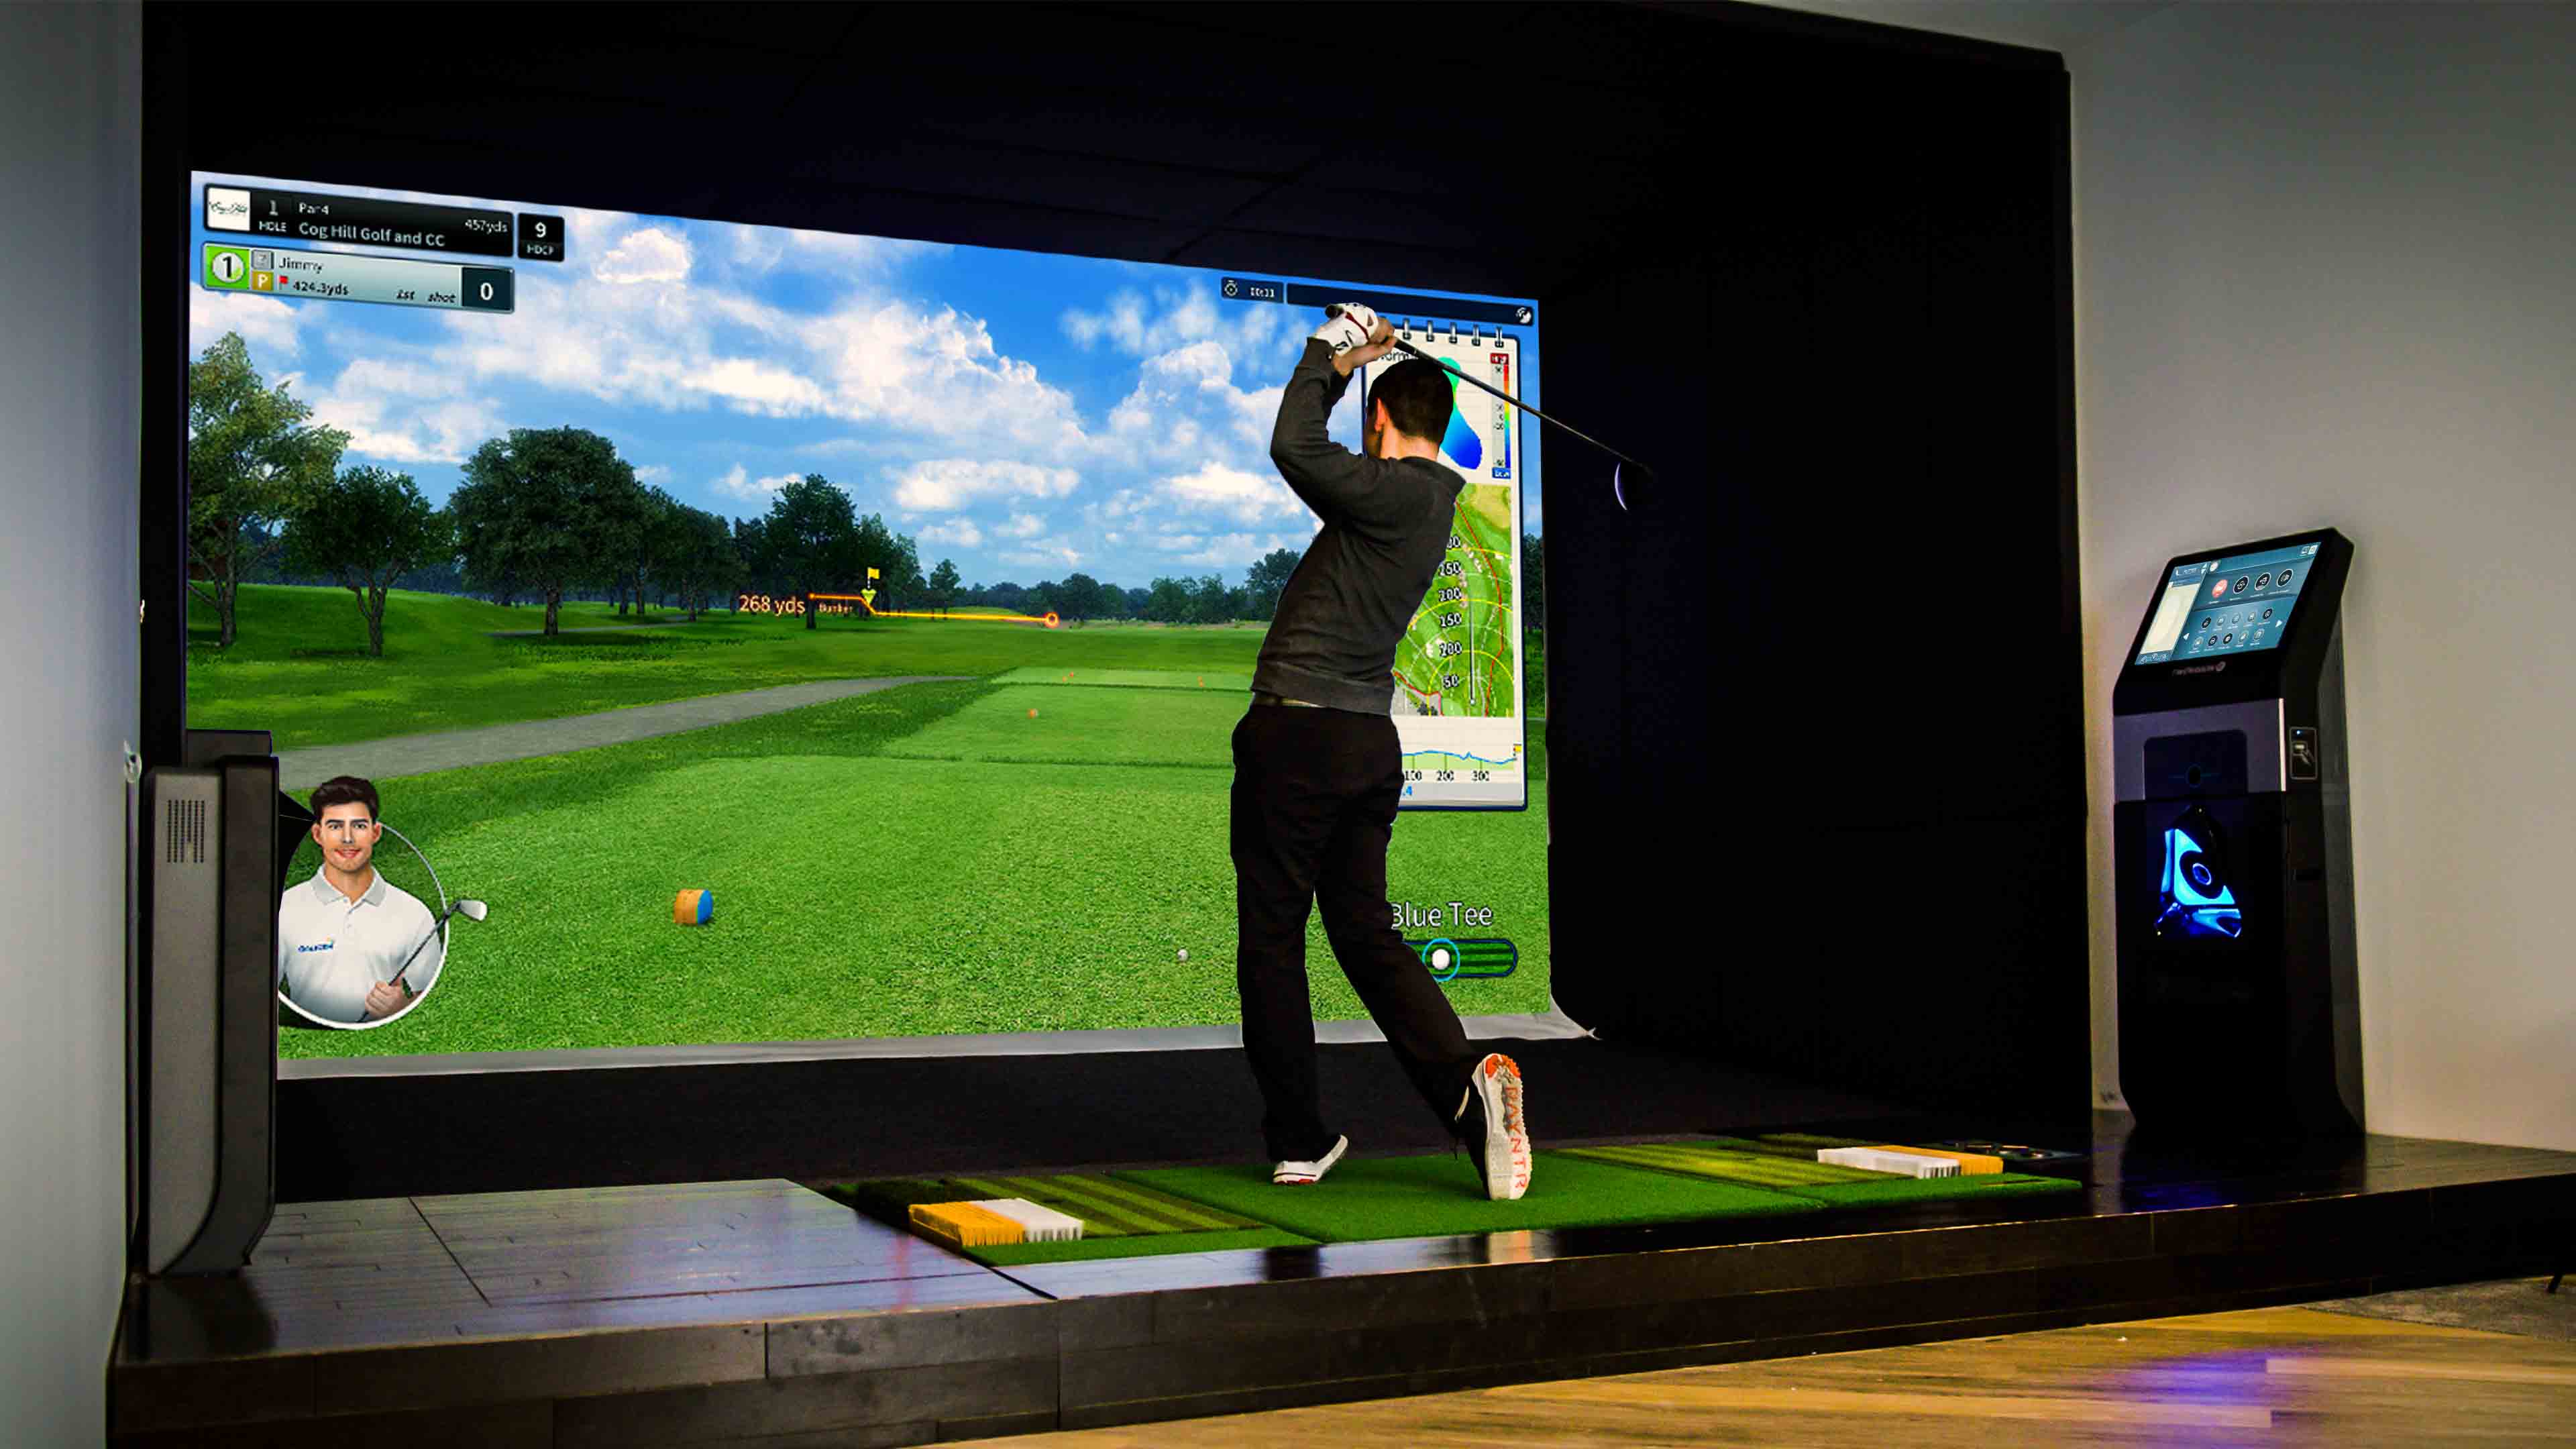 Man swinging a golf club while playing Golfzon TwoVision indoor golf simulator.